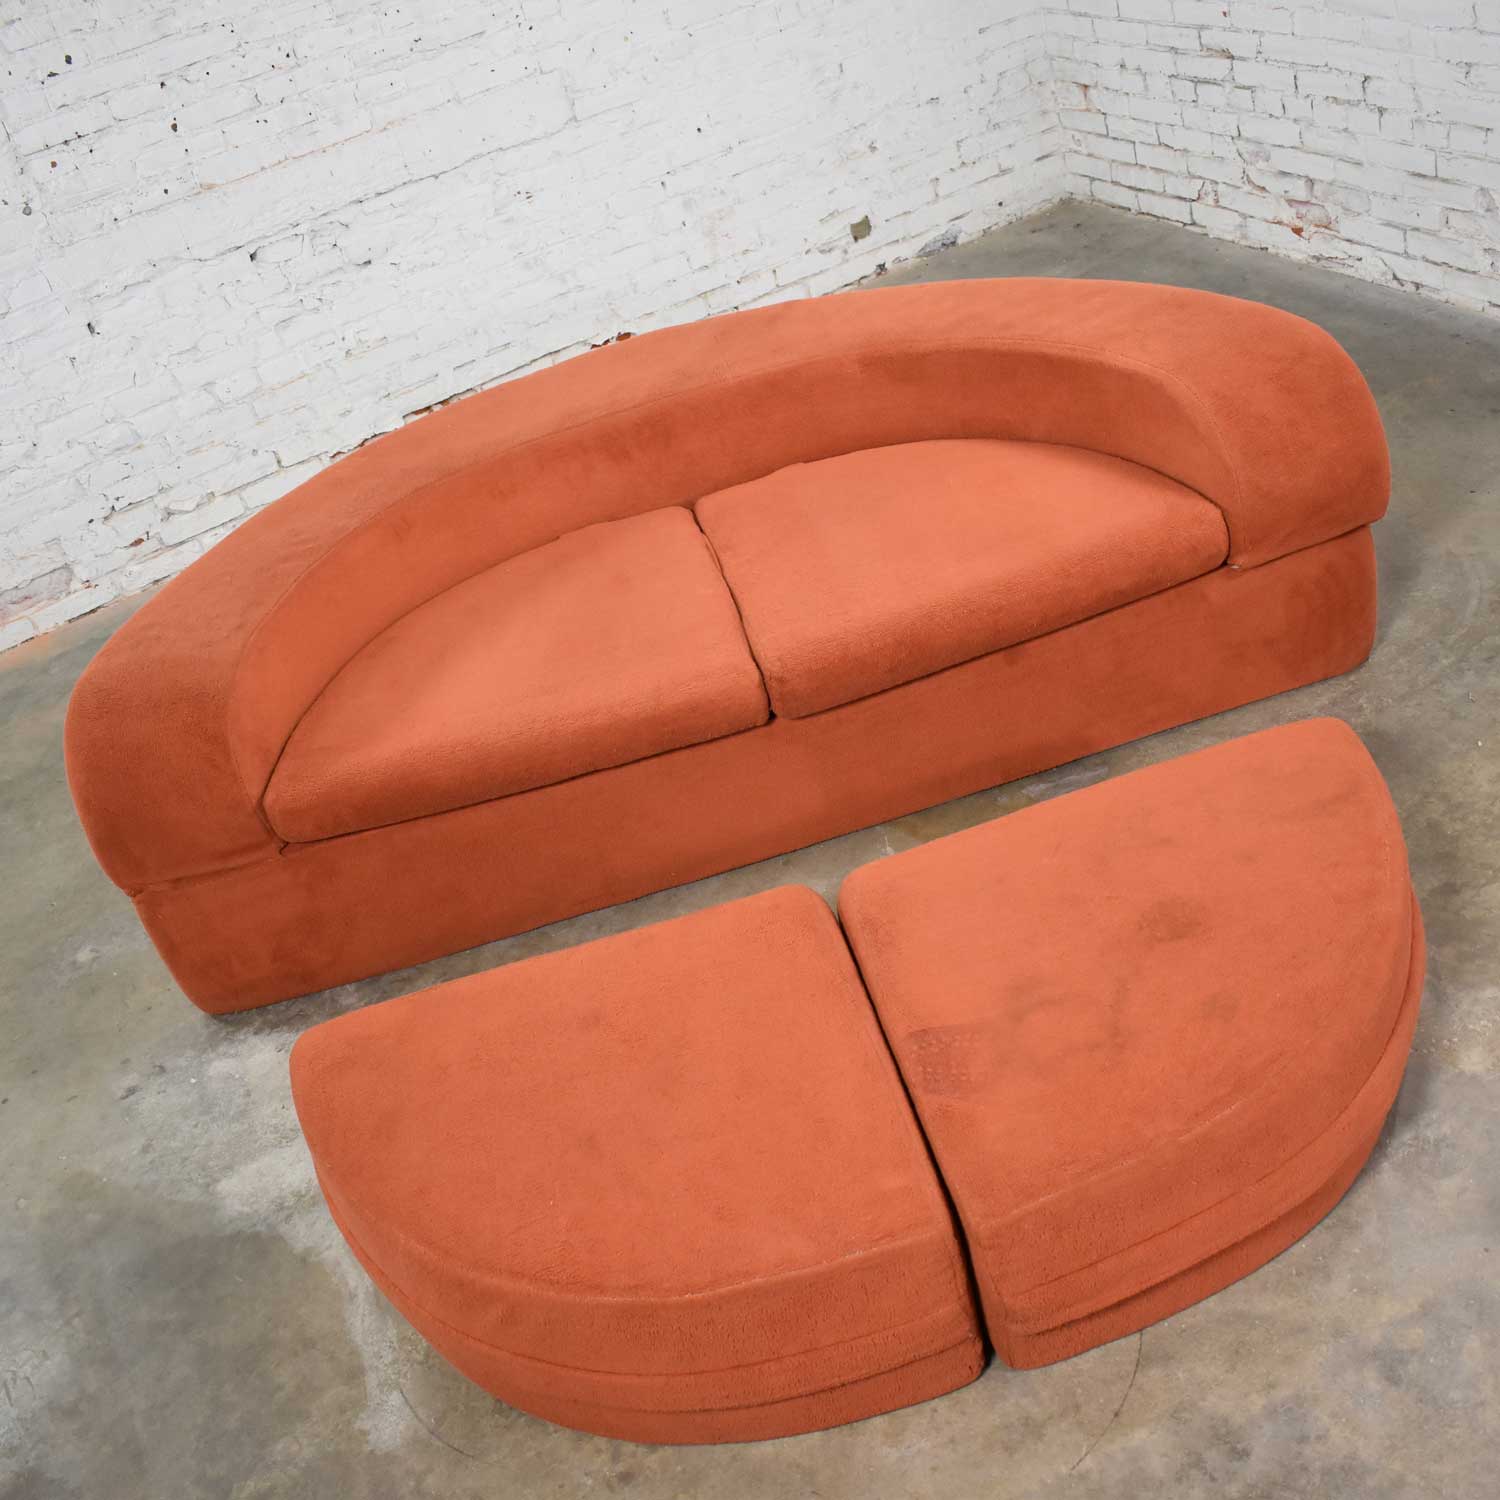 Mod Round Sleeper Sofa with Ottomans in Orange Fuzzy Fabric by Spherical Furniture